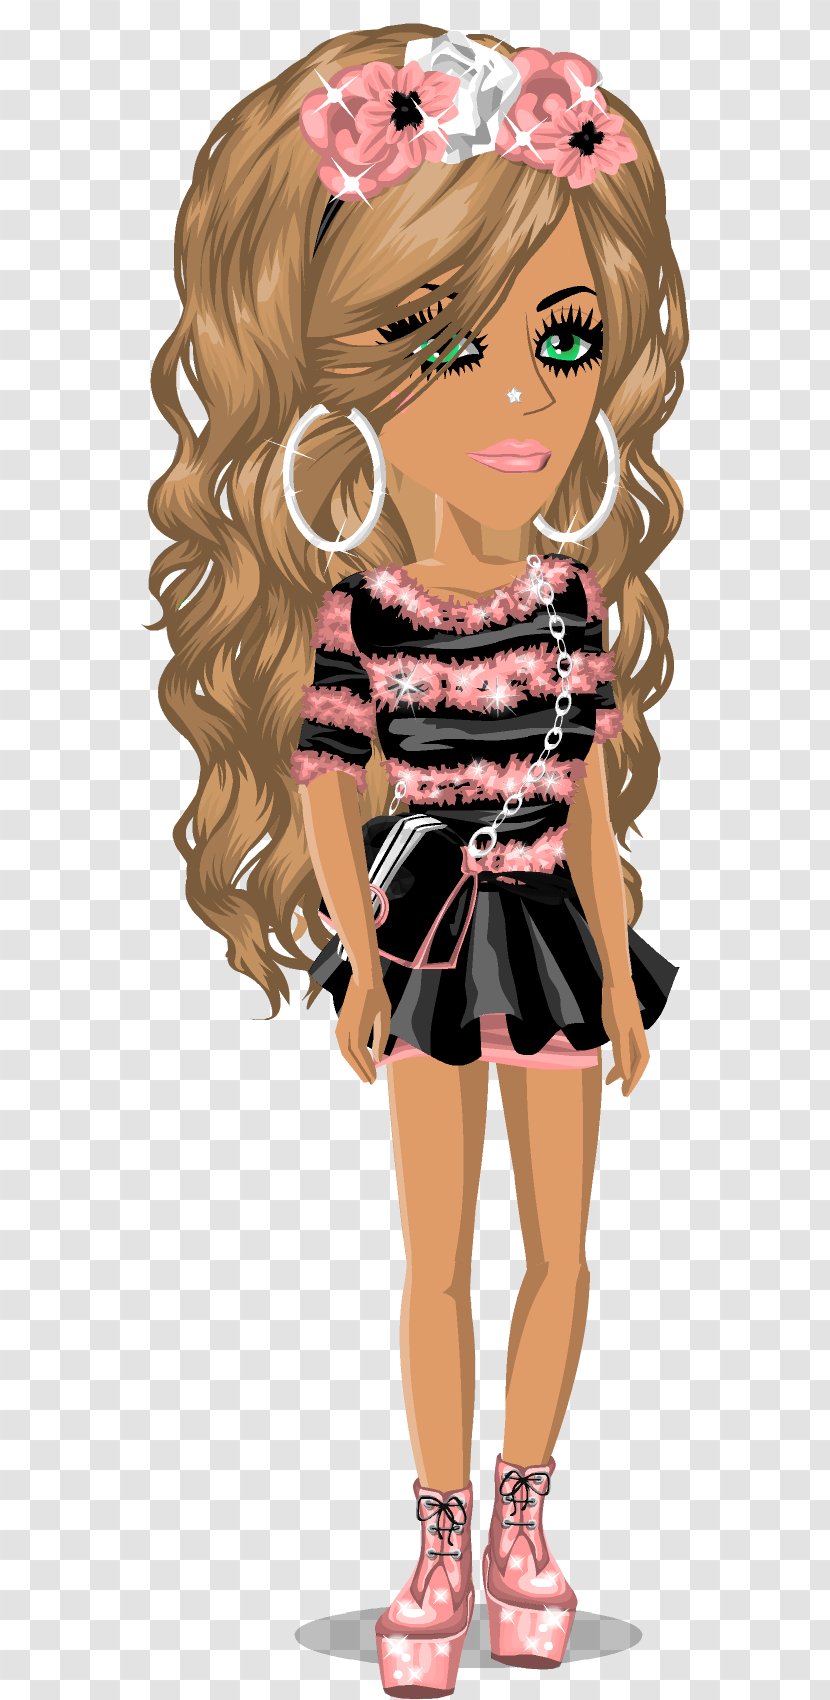 MovieStarPlanet Character Avatar Game - Watercolor - Vip Party Christmas Transparent PNG